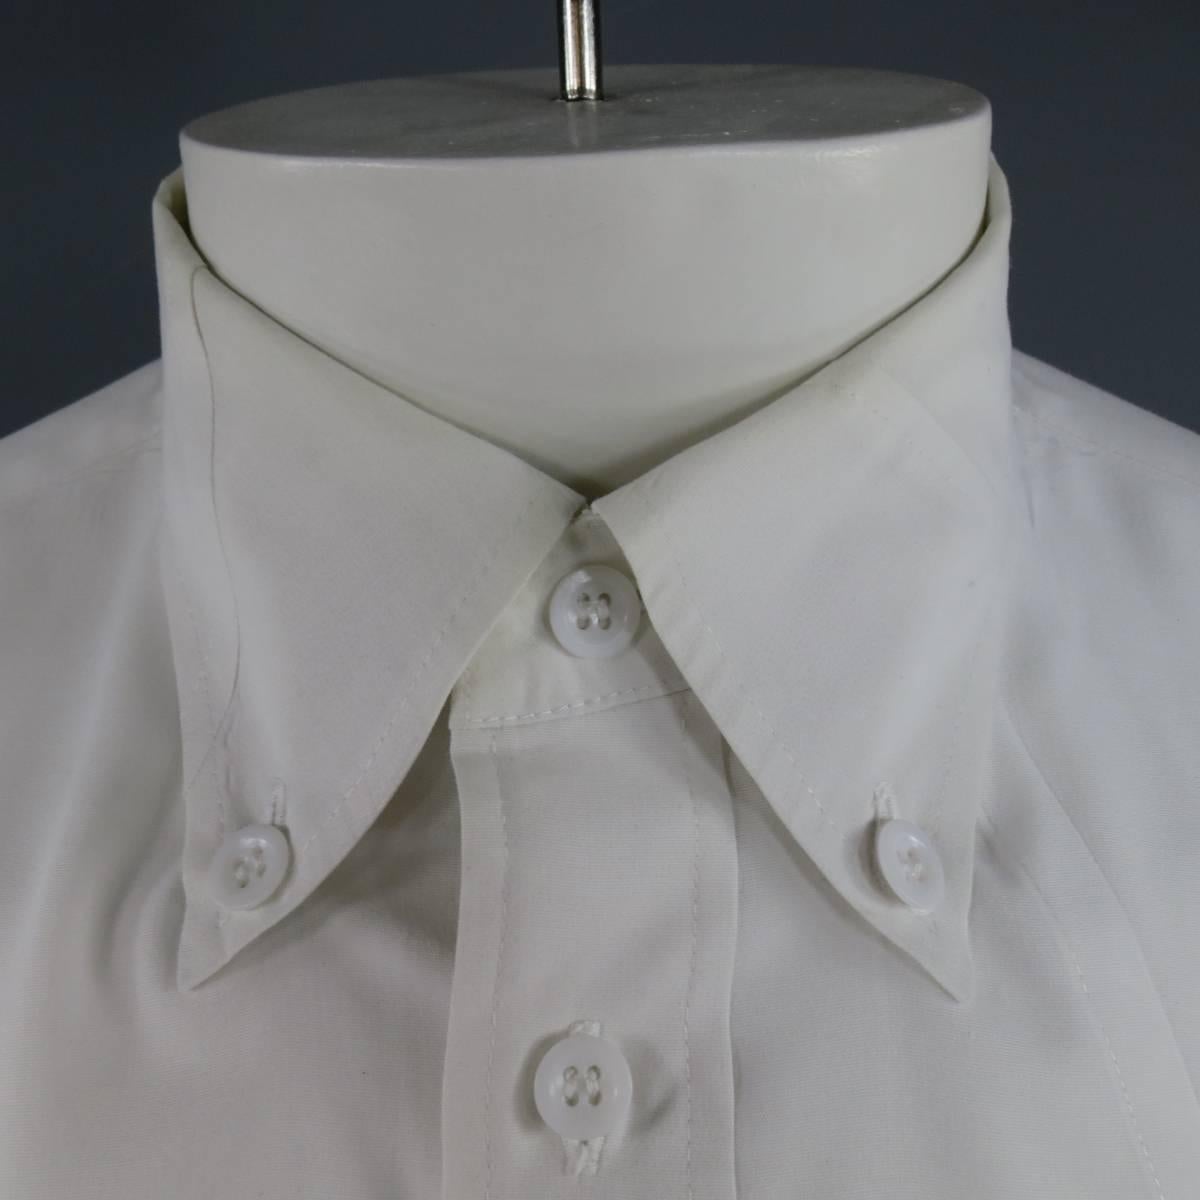 Vintage YOHJI YAMAMOTO shirt in a light weight cotton with a pointed button down collar, white buttons, and all over geometric patchwork construction.
 
Excellent Pre-Owned Condition.
Marked: JP 3
 
Measurements:
 
Shoulder: 18 in.
Chest: 46